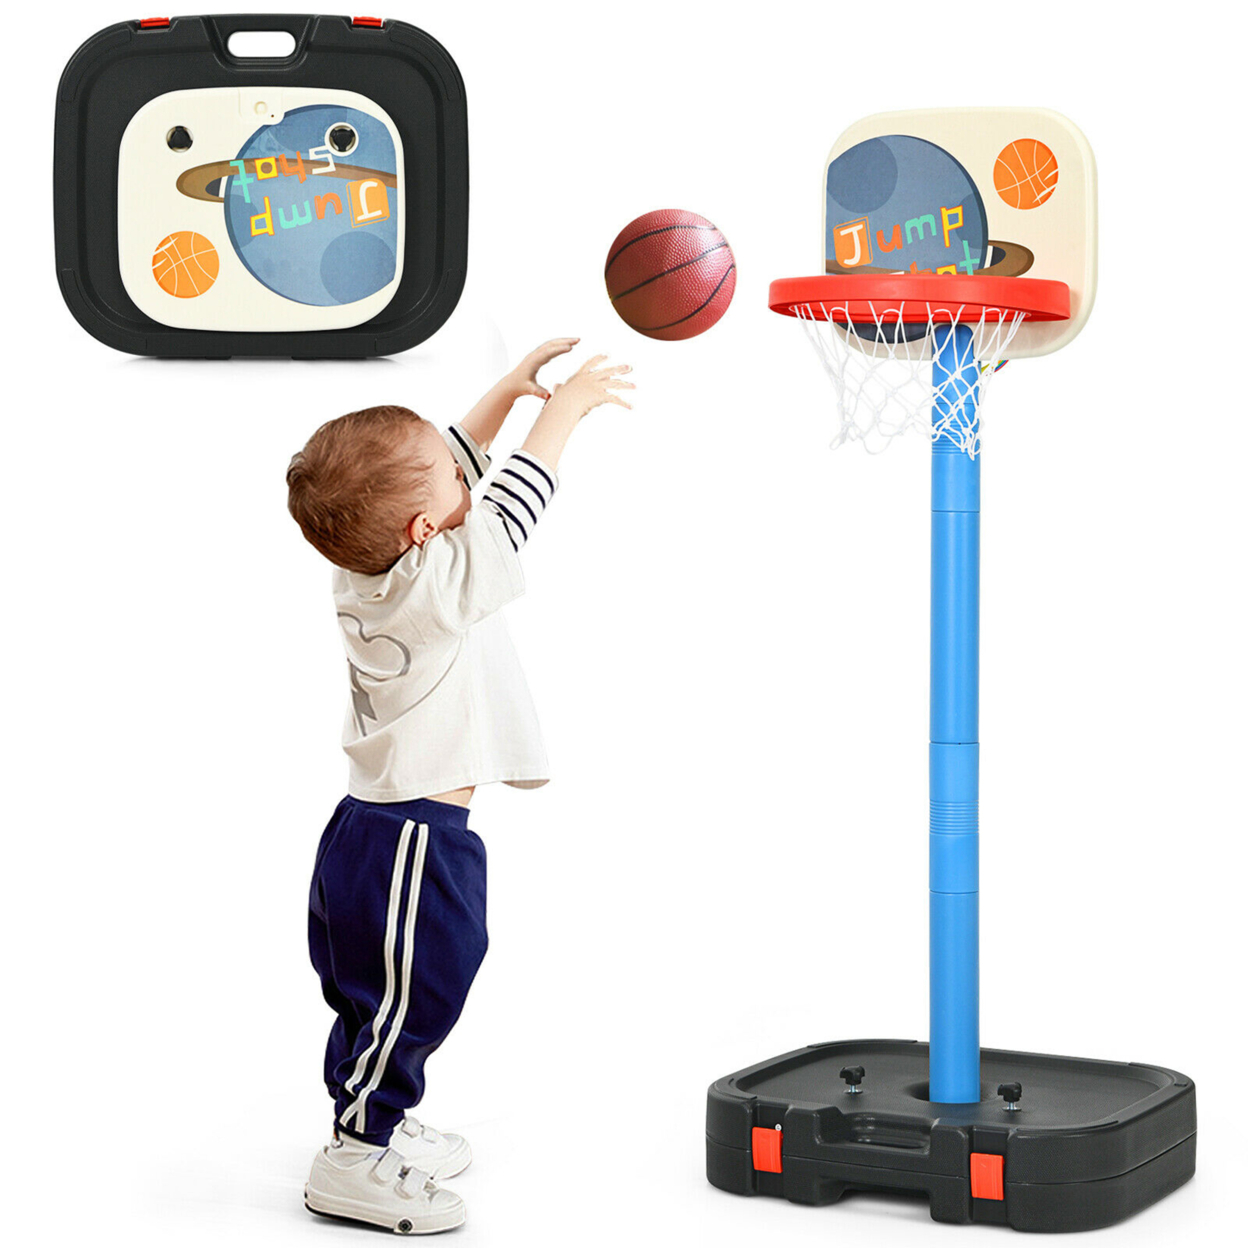 Portable 2 In 1 Kids Basketball Hoop Stand W/ Ring Toss & Storage Box - Black